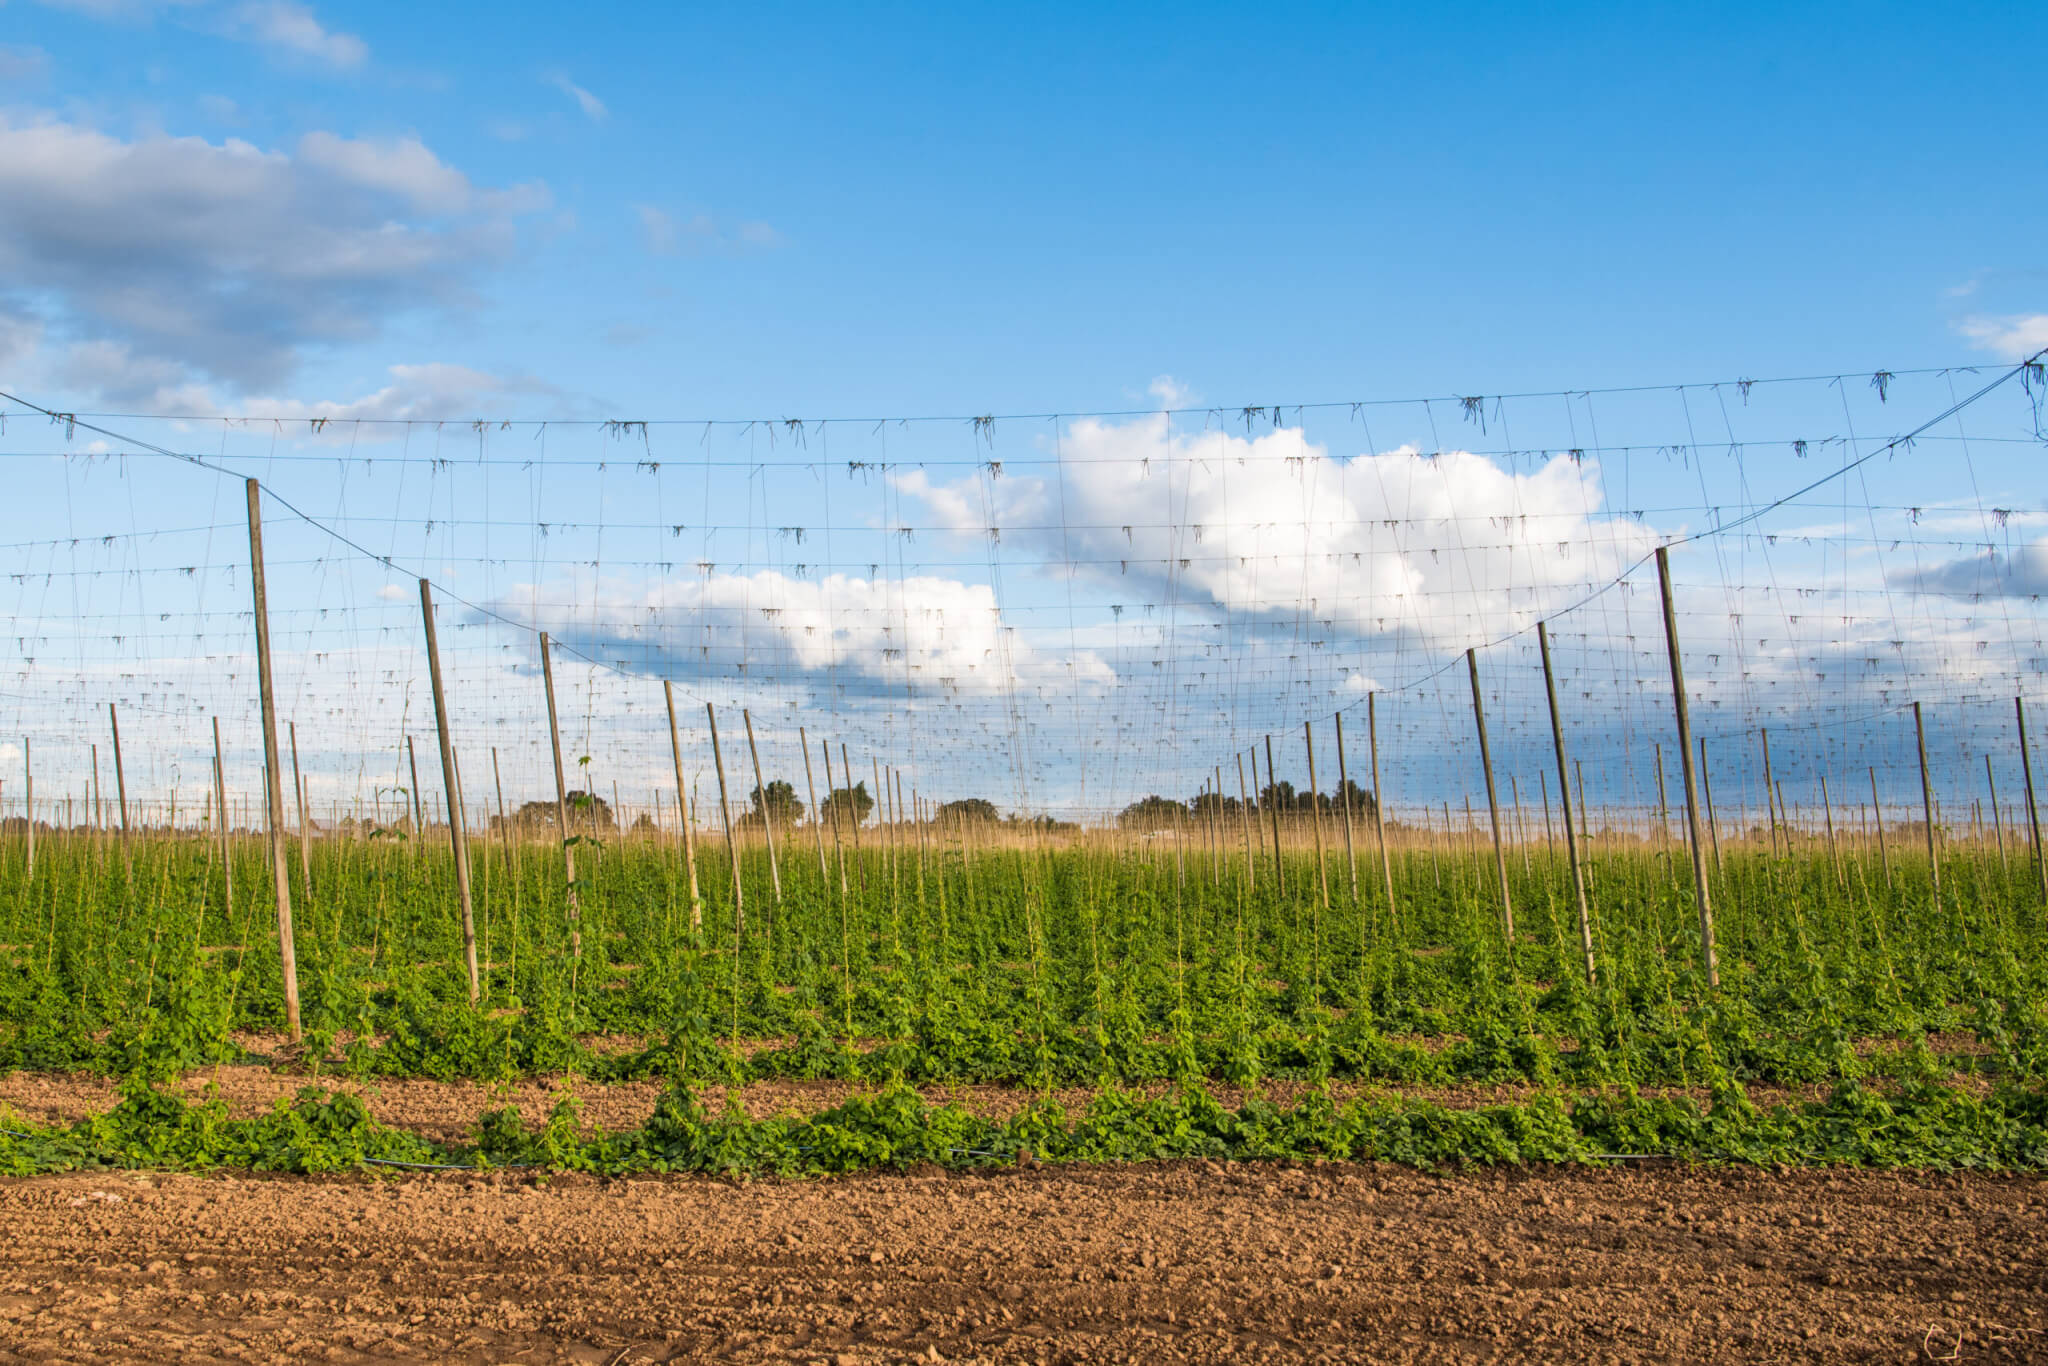 Hops growing on trellises in a field for use in the brewing industry in Oregon's Willamette Valley